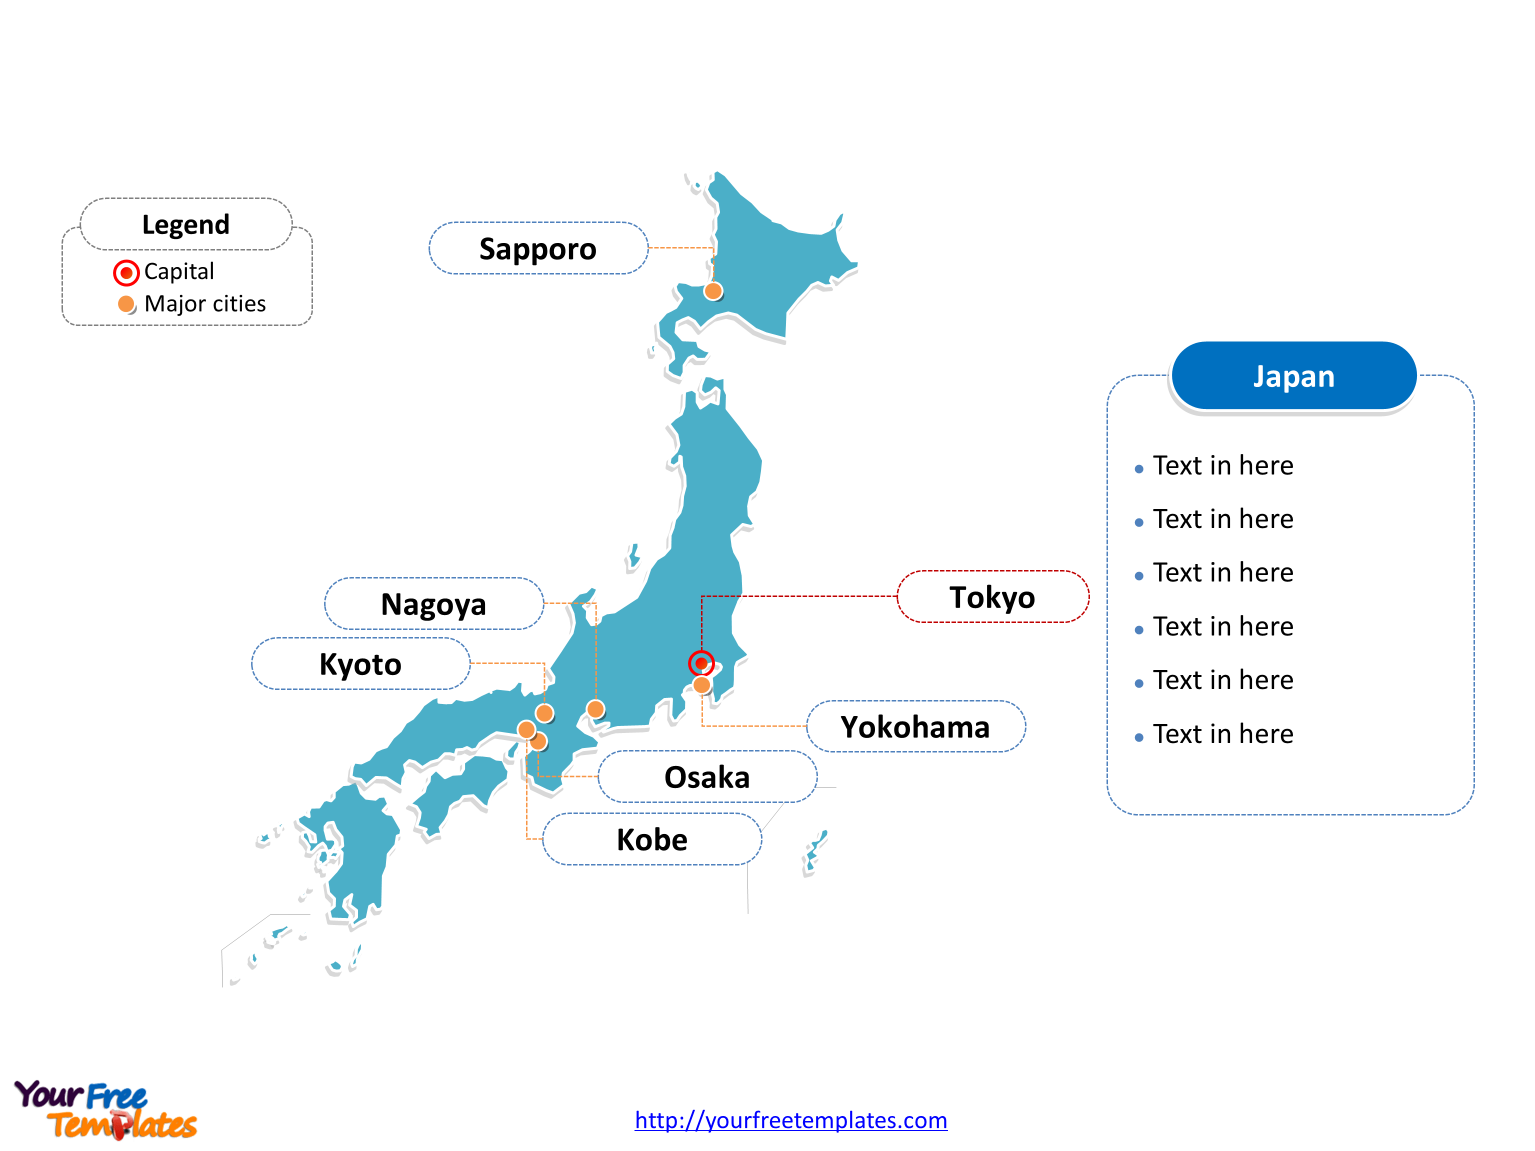 Japan Editable map labeled with cities